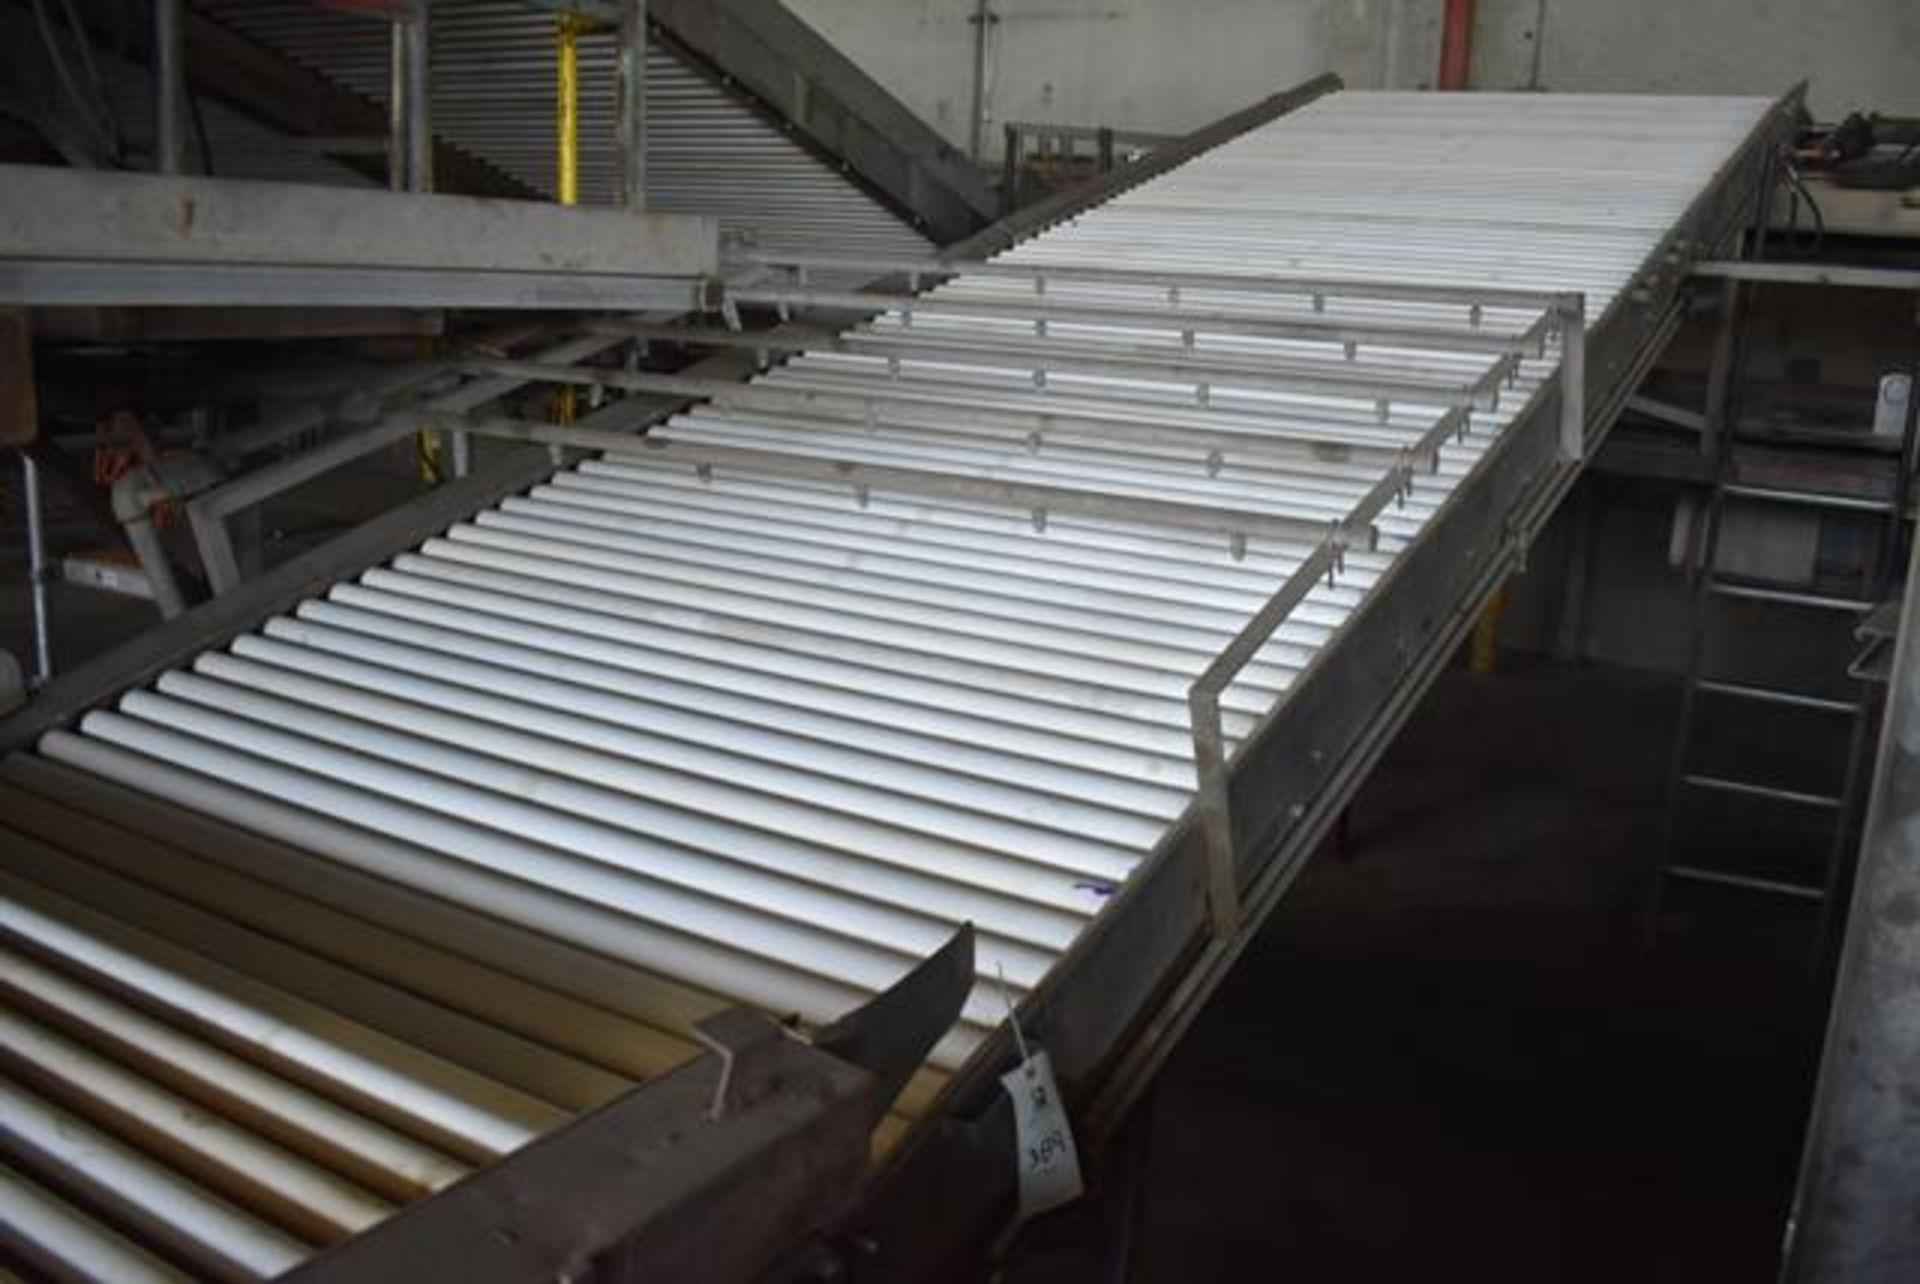 Packers Motorized Conveyor, 72 in. Wide x Approx. 20 ft. Length, RIGGING FEE: $700